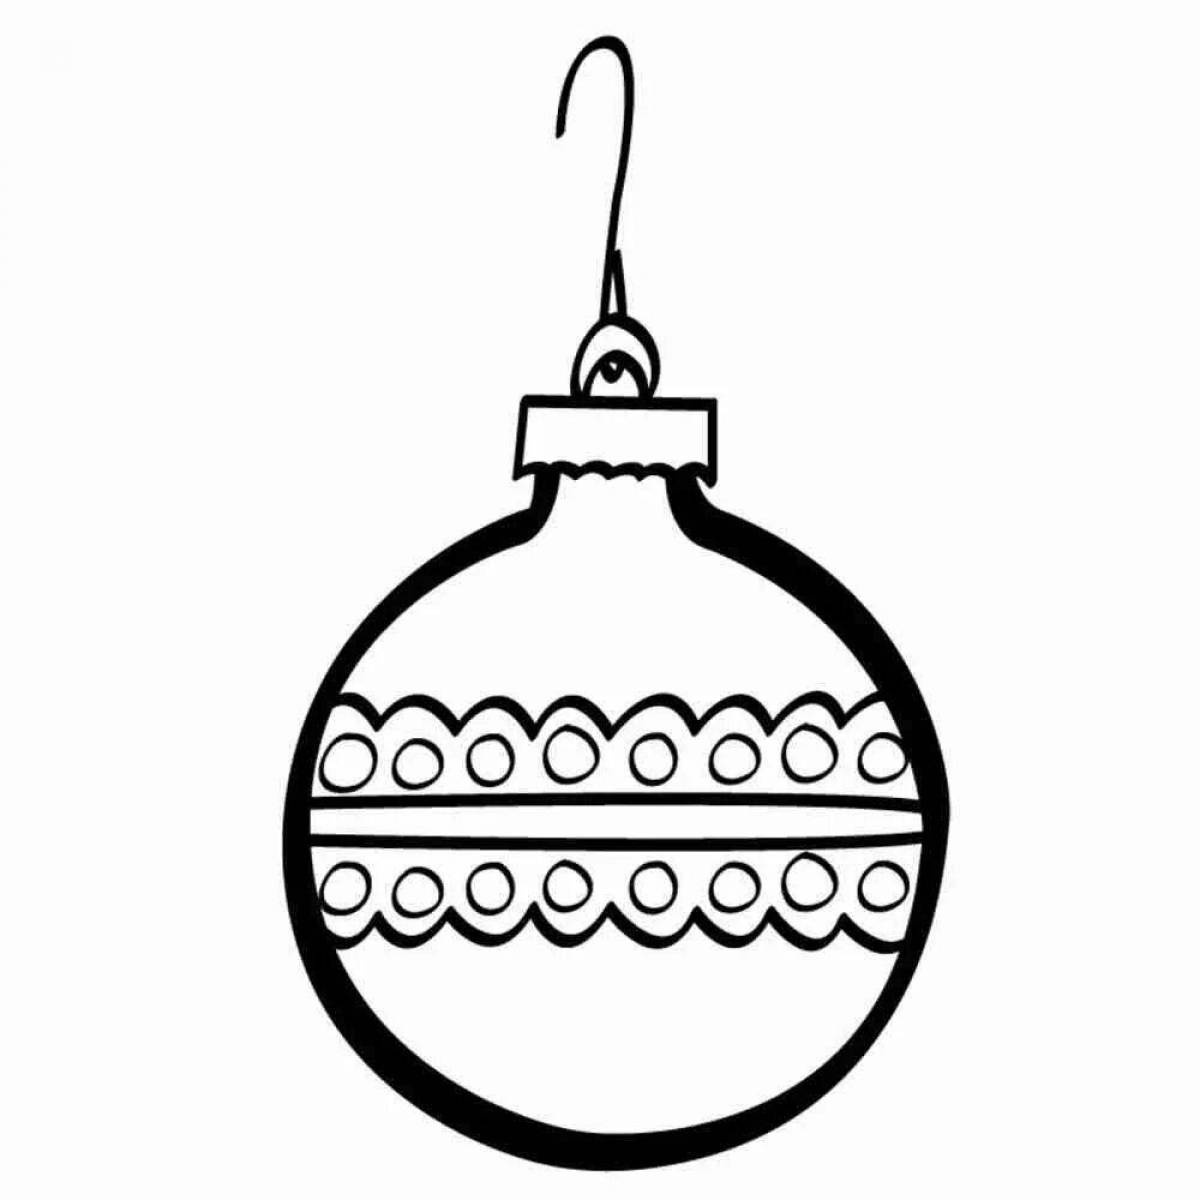 Amazing Christmas ball coloring page for kids